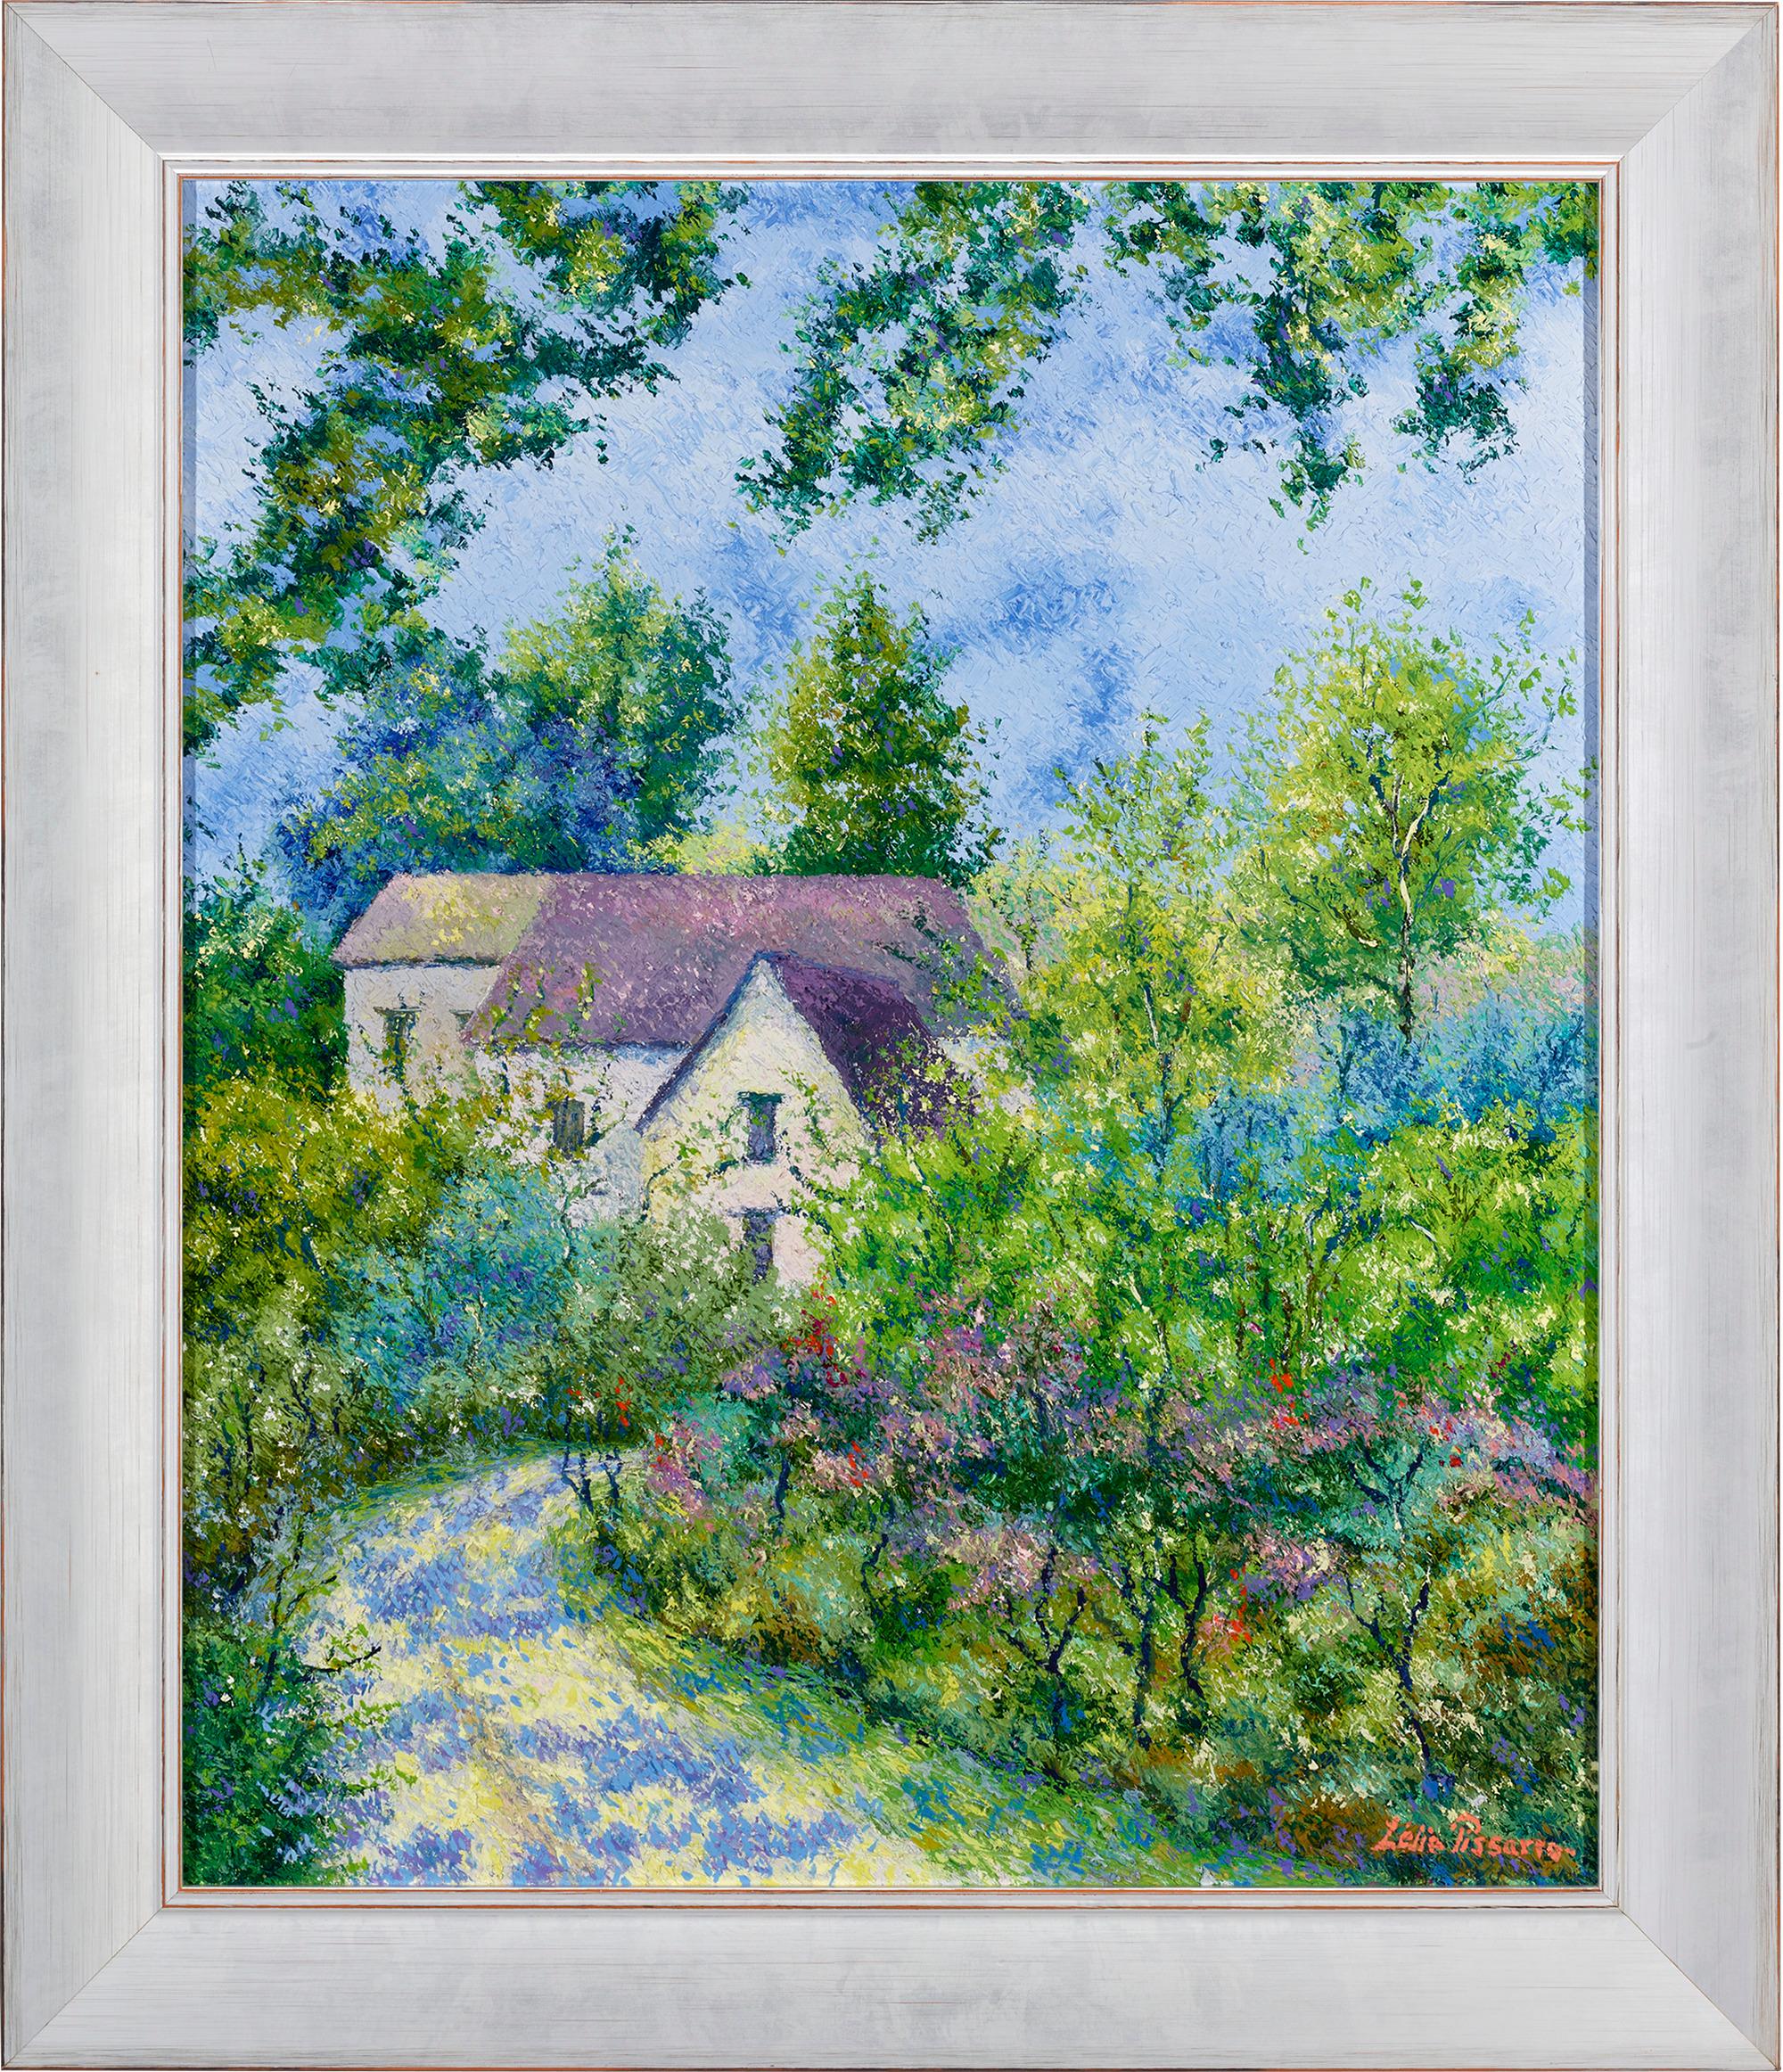 Empedocles' Village - Painting by Lelia Pissarro